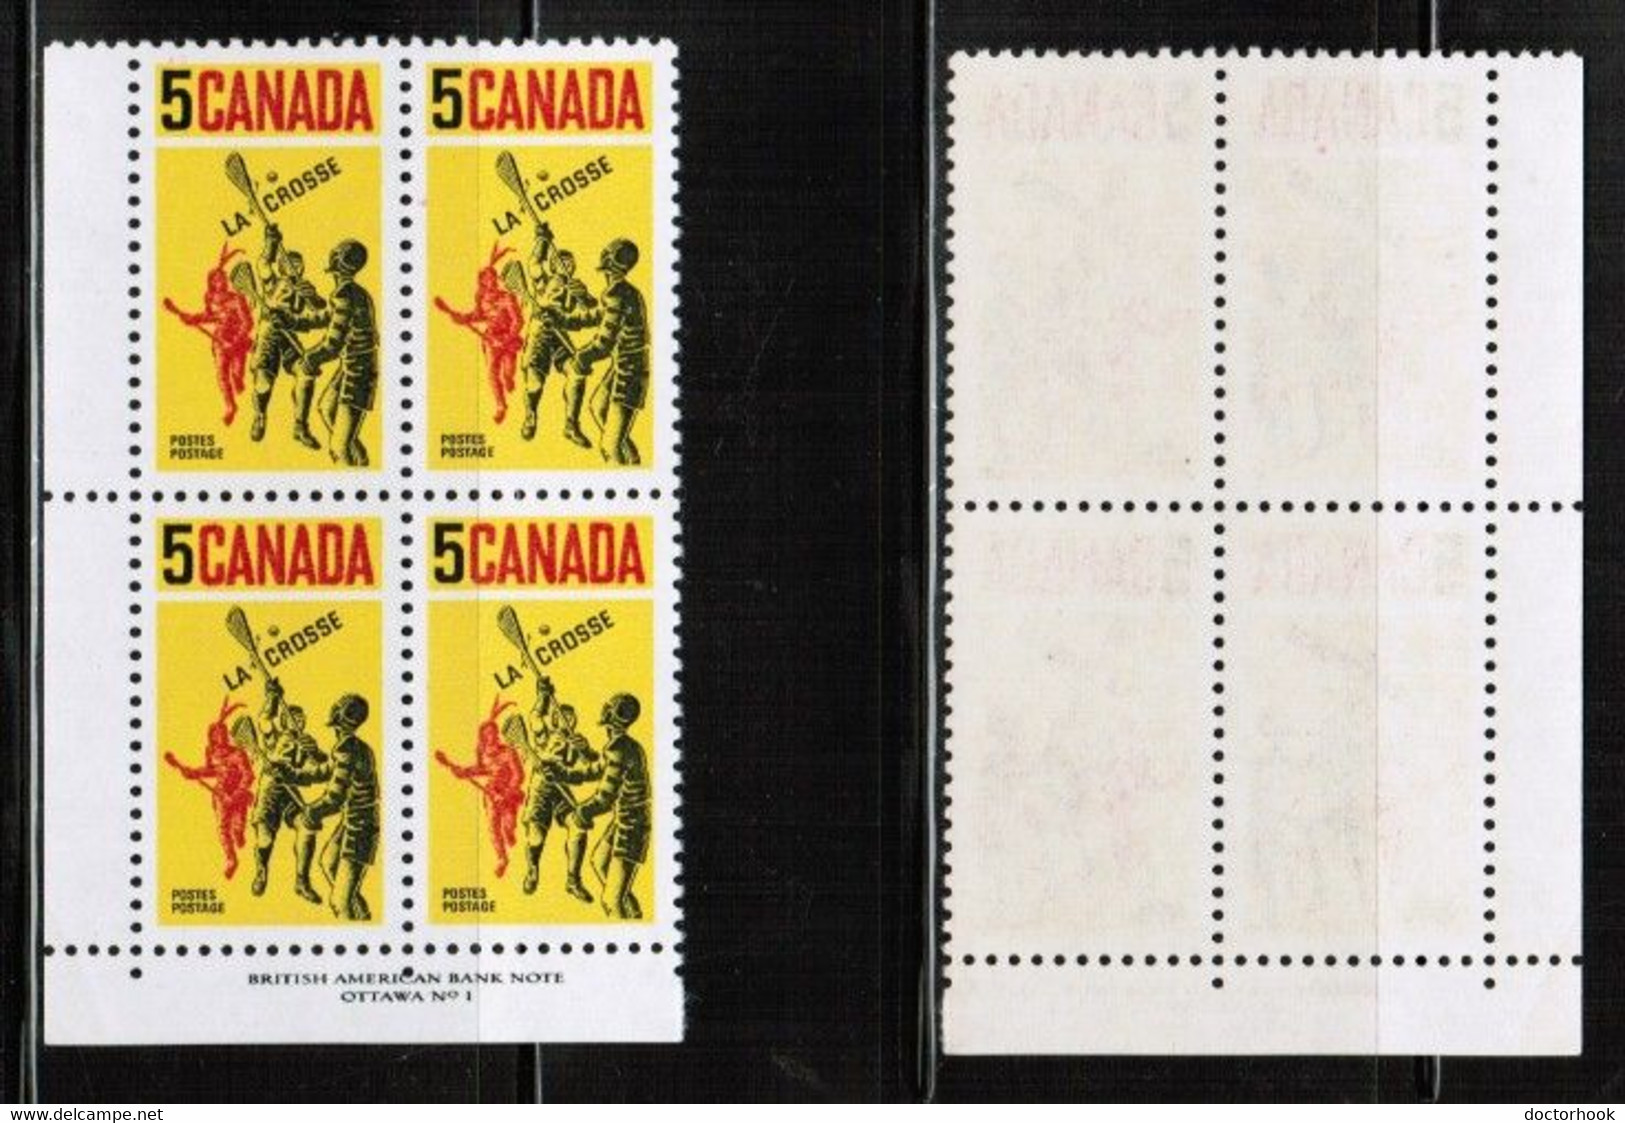 CANADA   Scott # 483** MINT NH PLATE #1 BLOCK Of 4 CONDITION AS PER SCAN (LG-1458) - Num. Planches & Inscriptions Marge